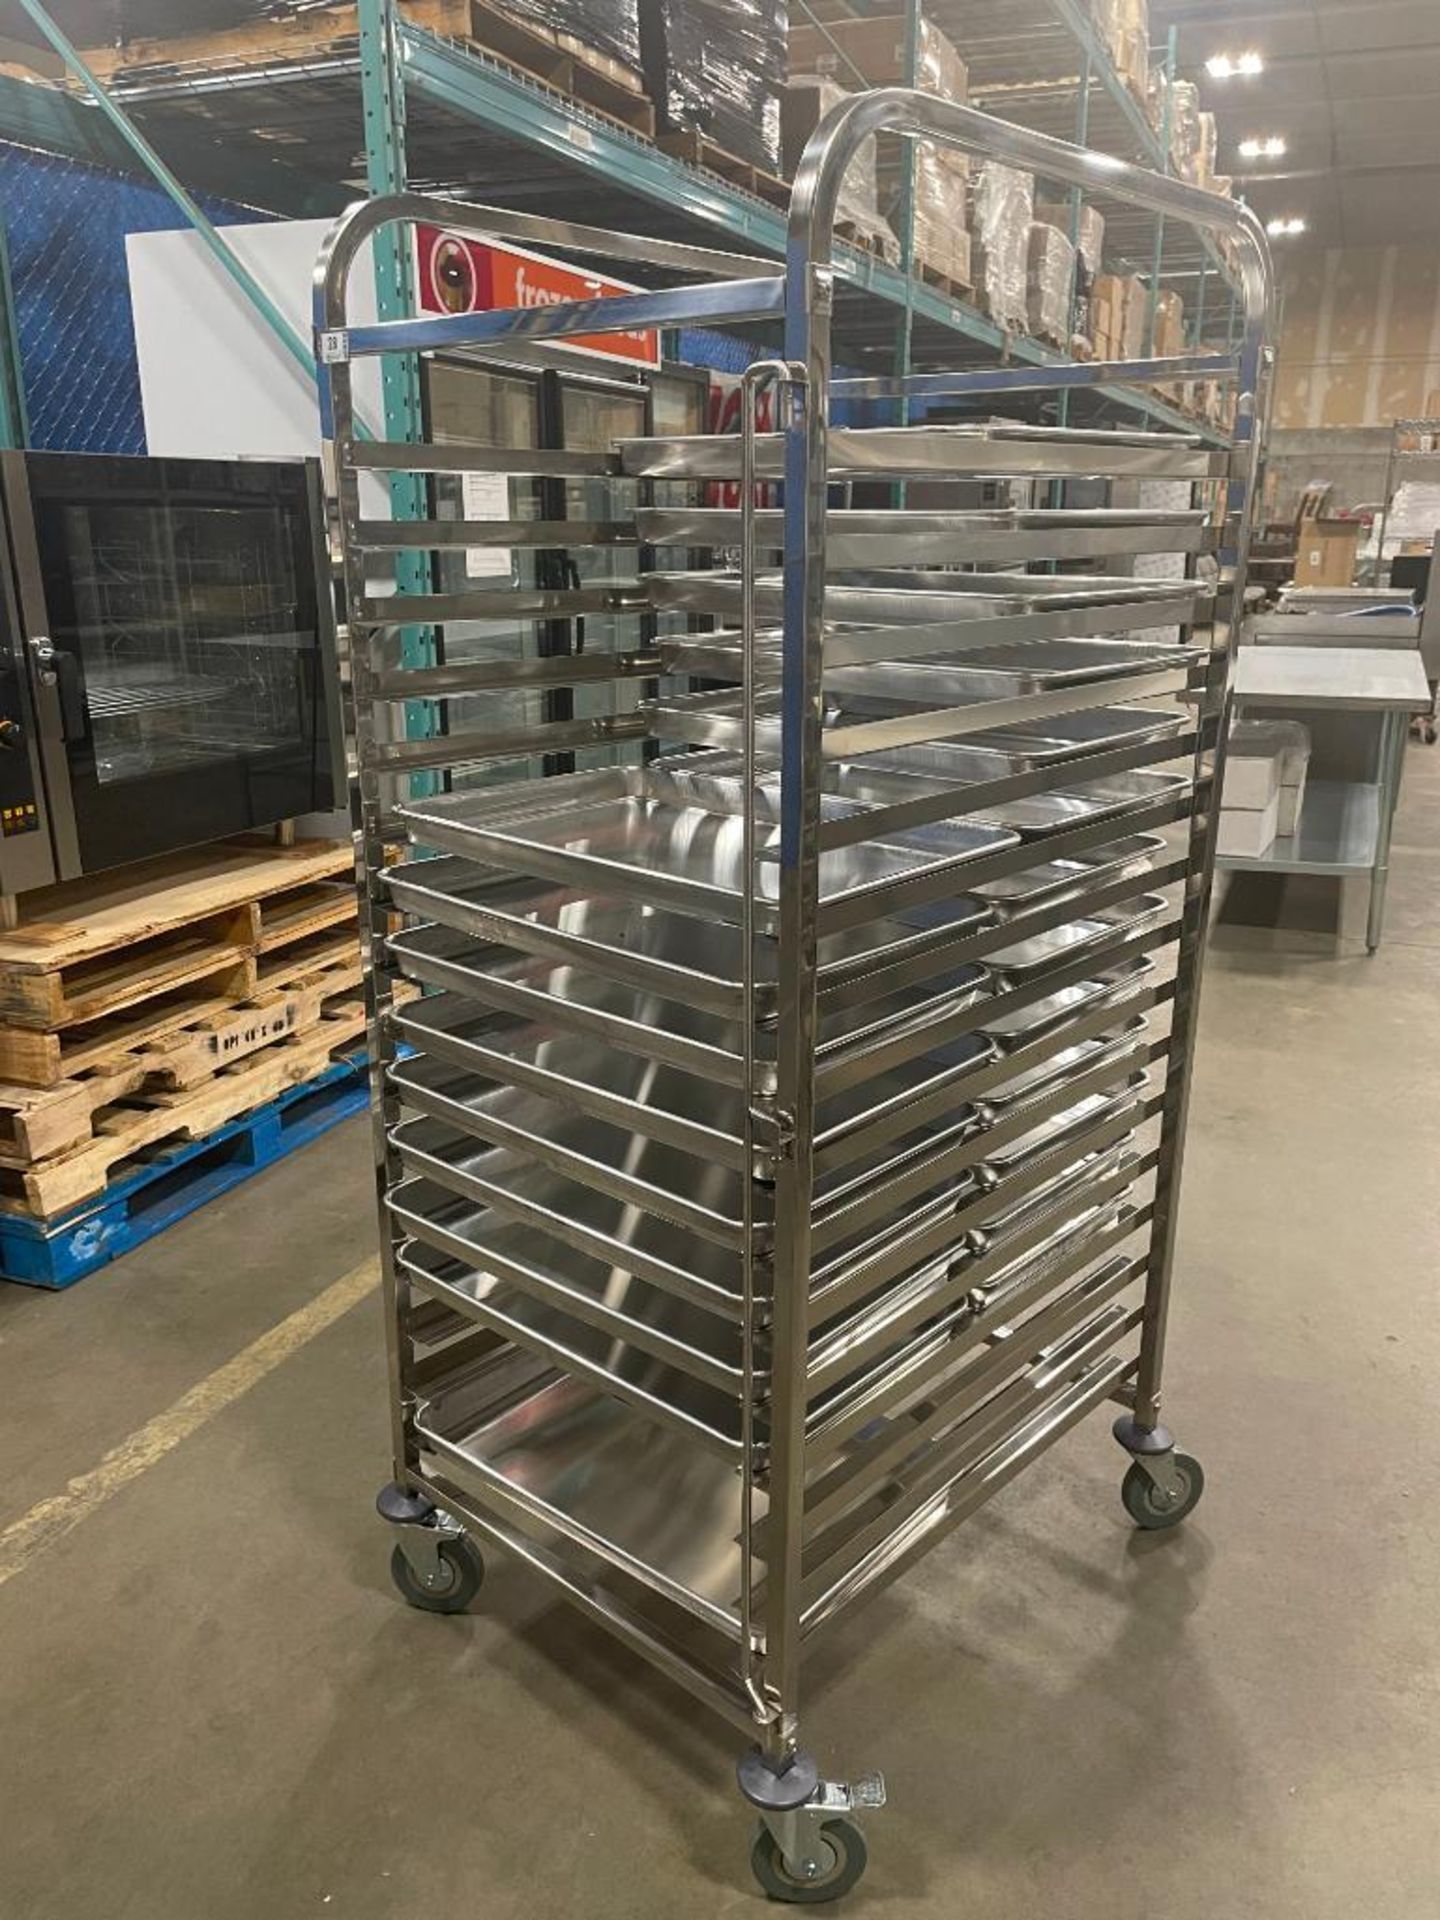 NEW STAINLESS STEEL 16-SLOT OVERSIZED BUN PAN RACK WITH PAN GUARD & (22) PANS - Image 2 of 9